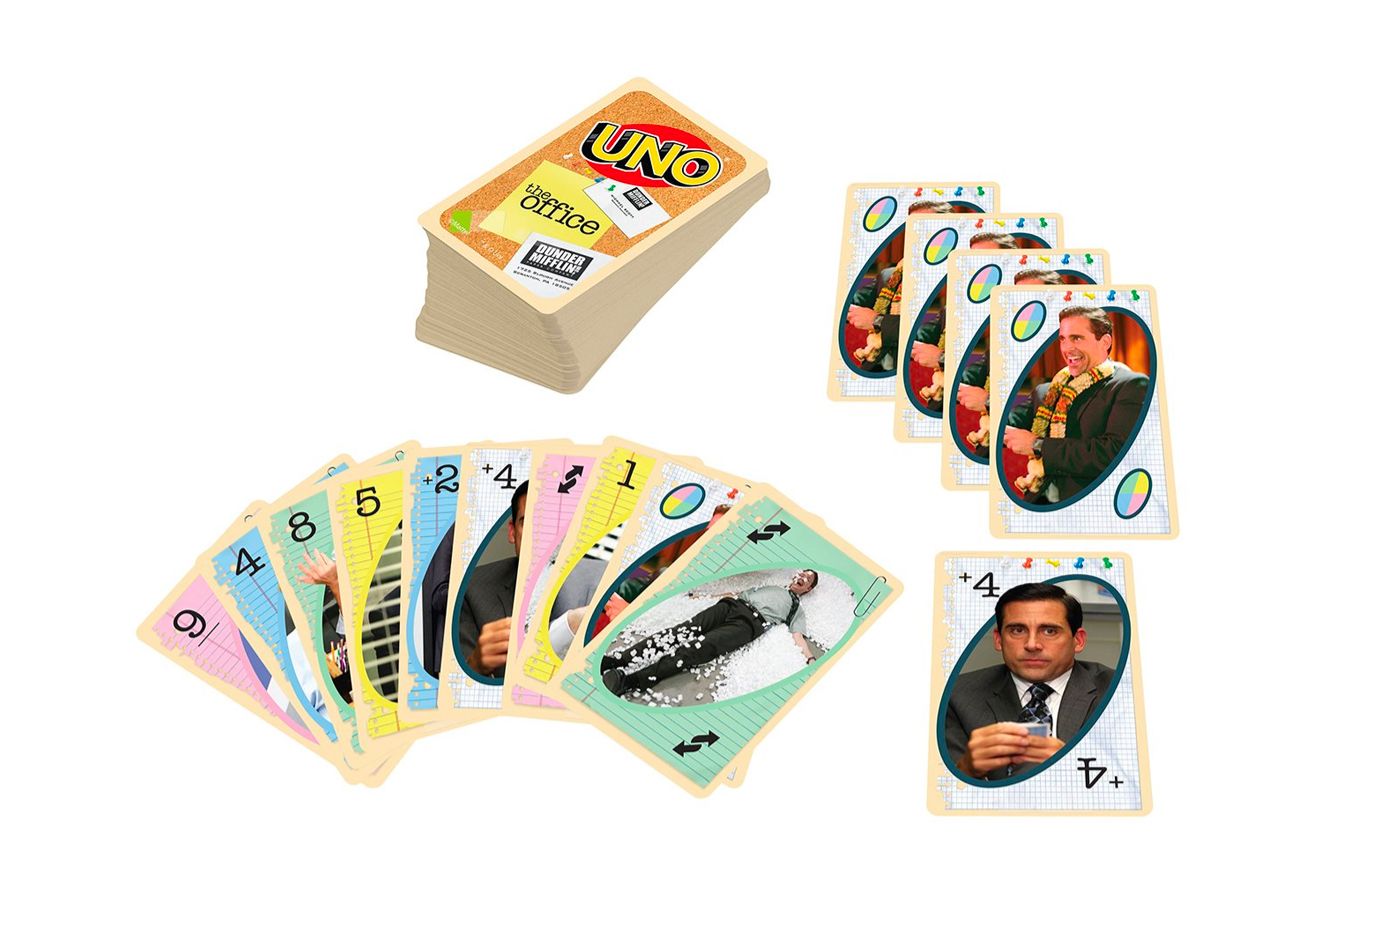 The Office UNO card game